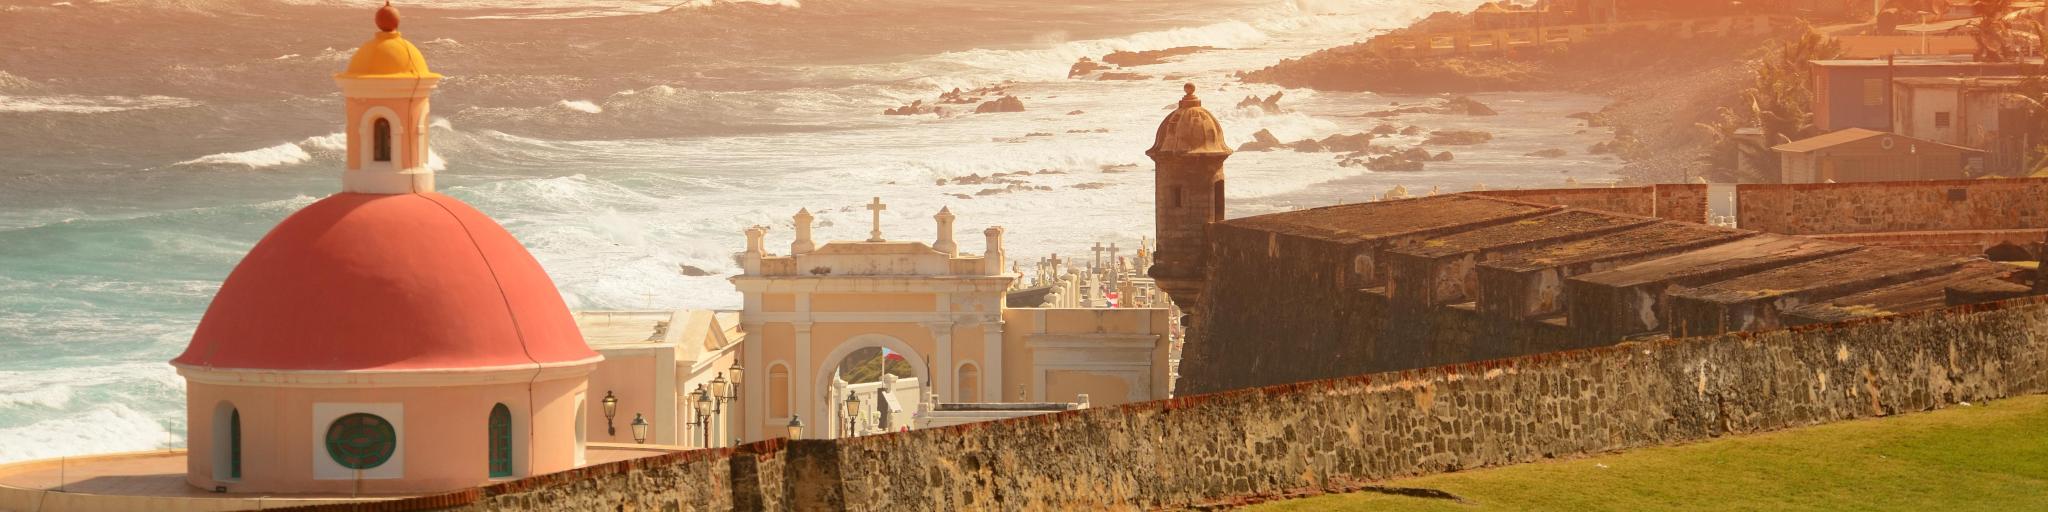 Old San Juan in Puerto Rico, ocean view with buildings in red tone during sunset